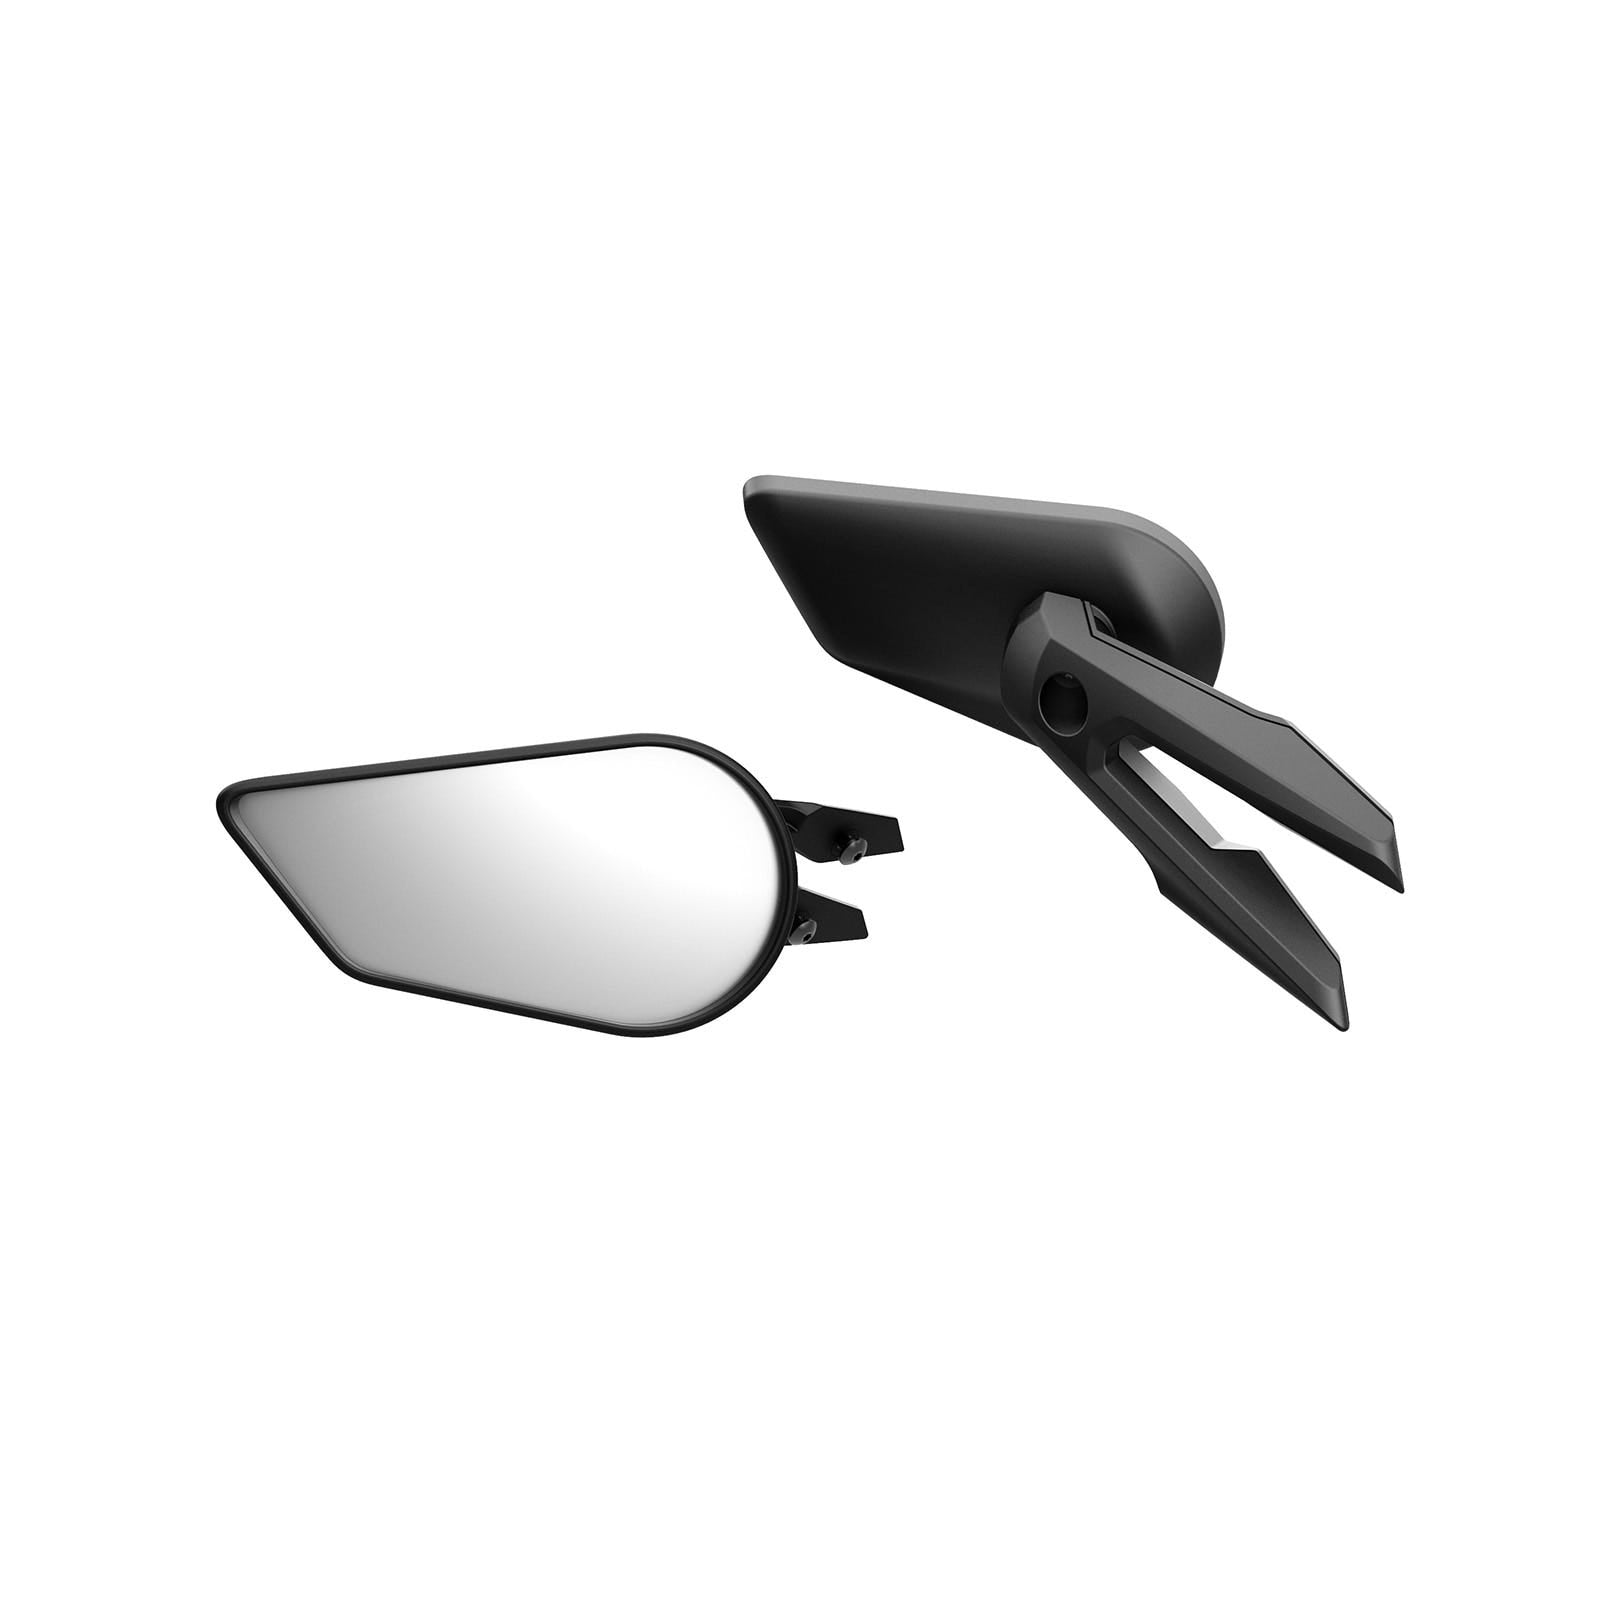 Windshield-Mount Mirrors - 860201285 - The Parts Lodge